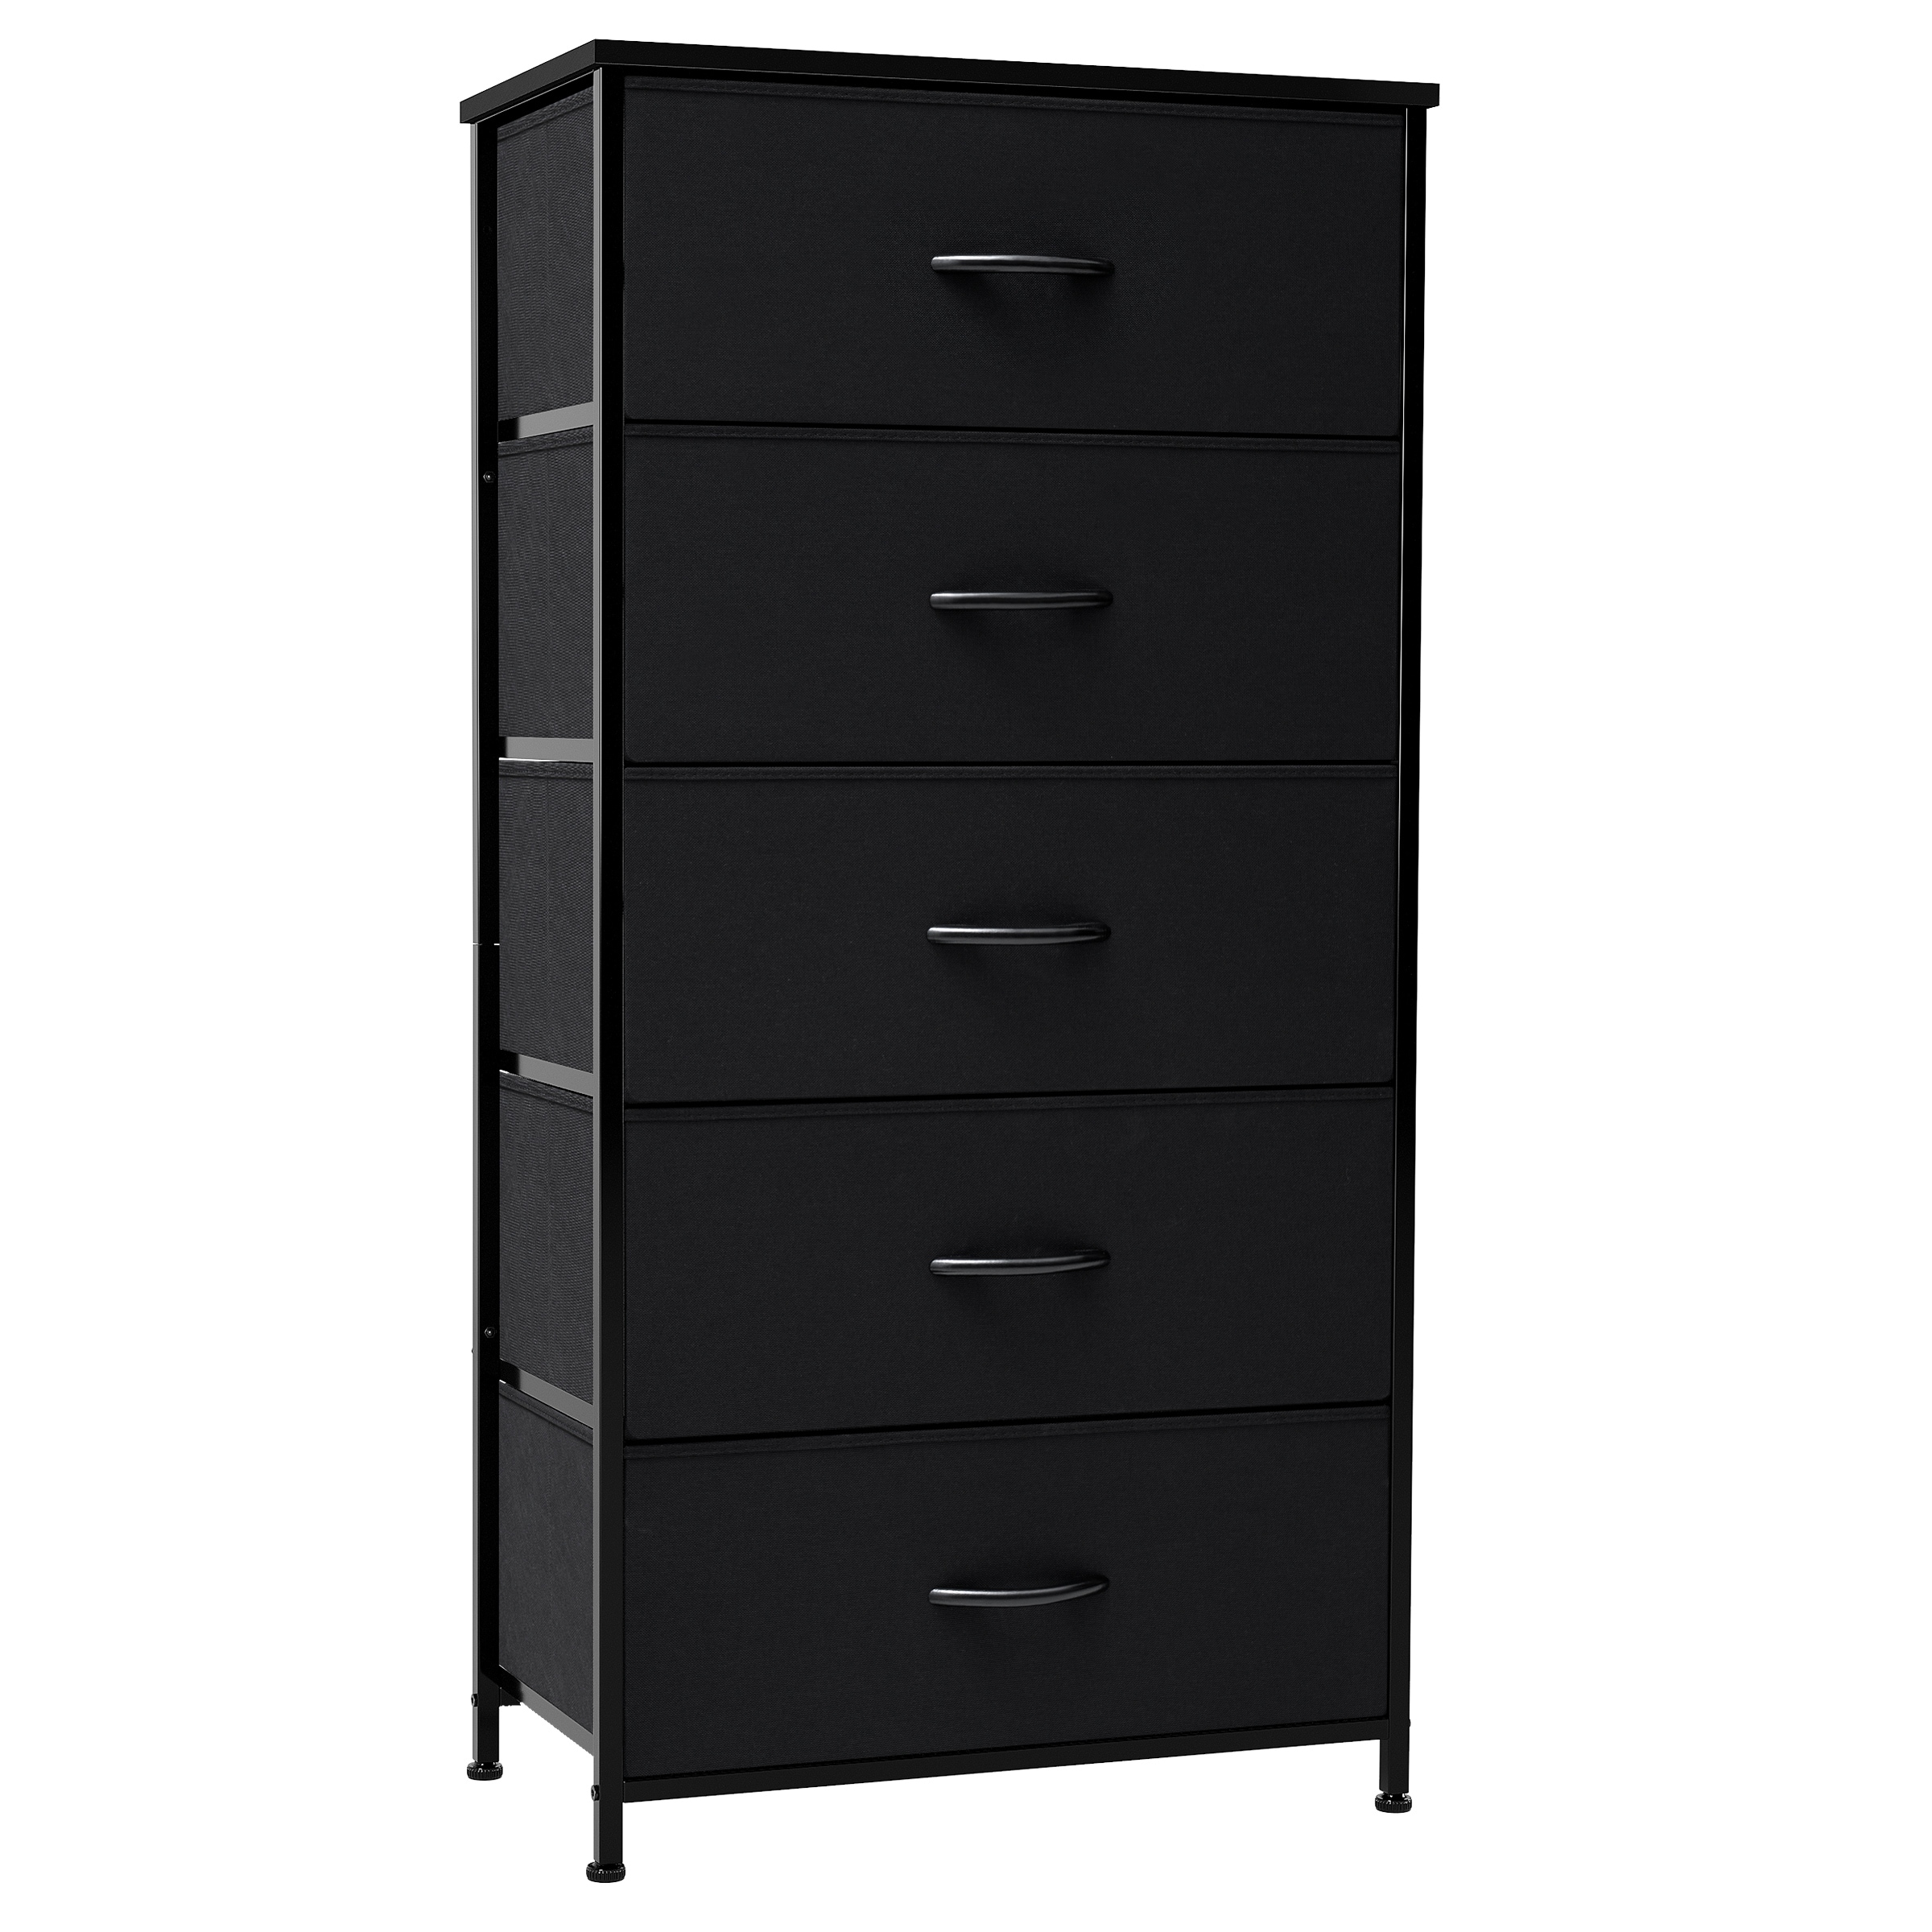 https://ak1.ostkcdn.com/images/products/is/images/direct/7c8f2d83e173981beeebb4271215fe39c4a14f91/5-Drawers-Vertical-Dresser-Storage-Tower-Organizer-Unit-for-Bedroom.jpg